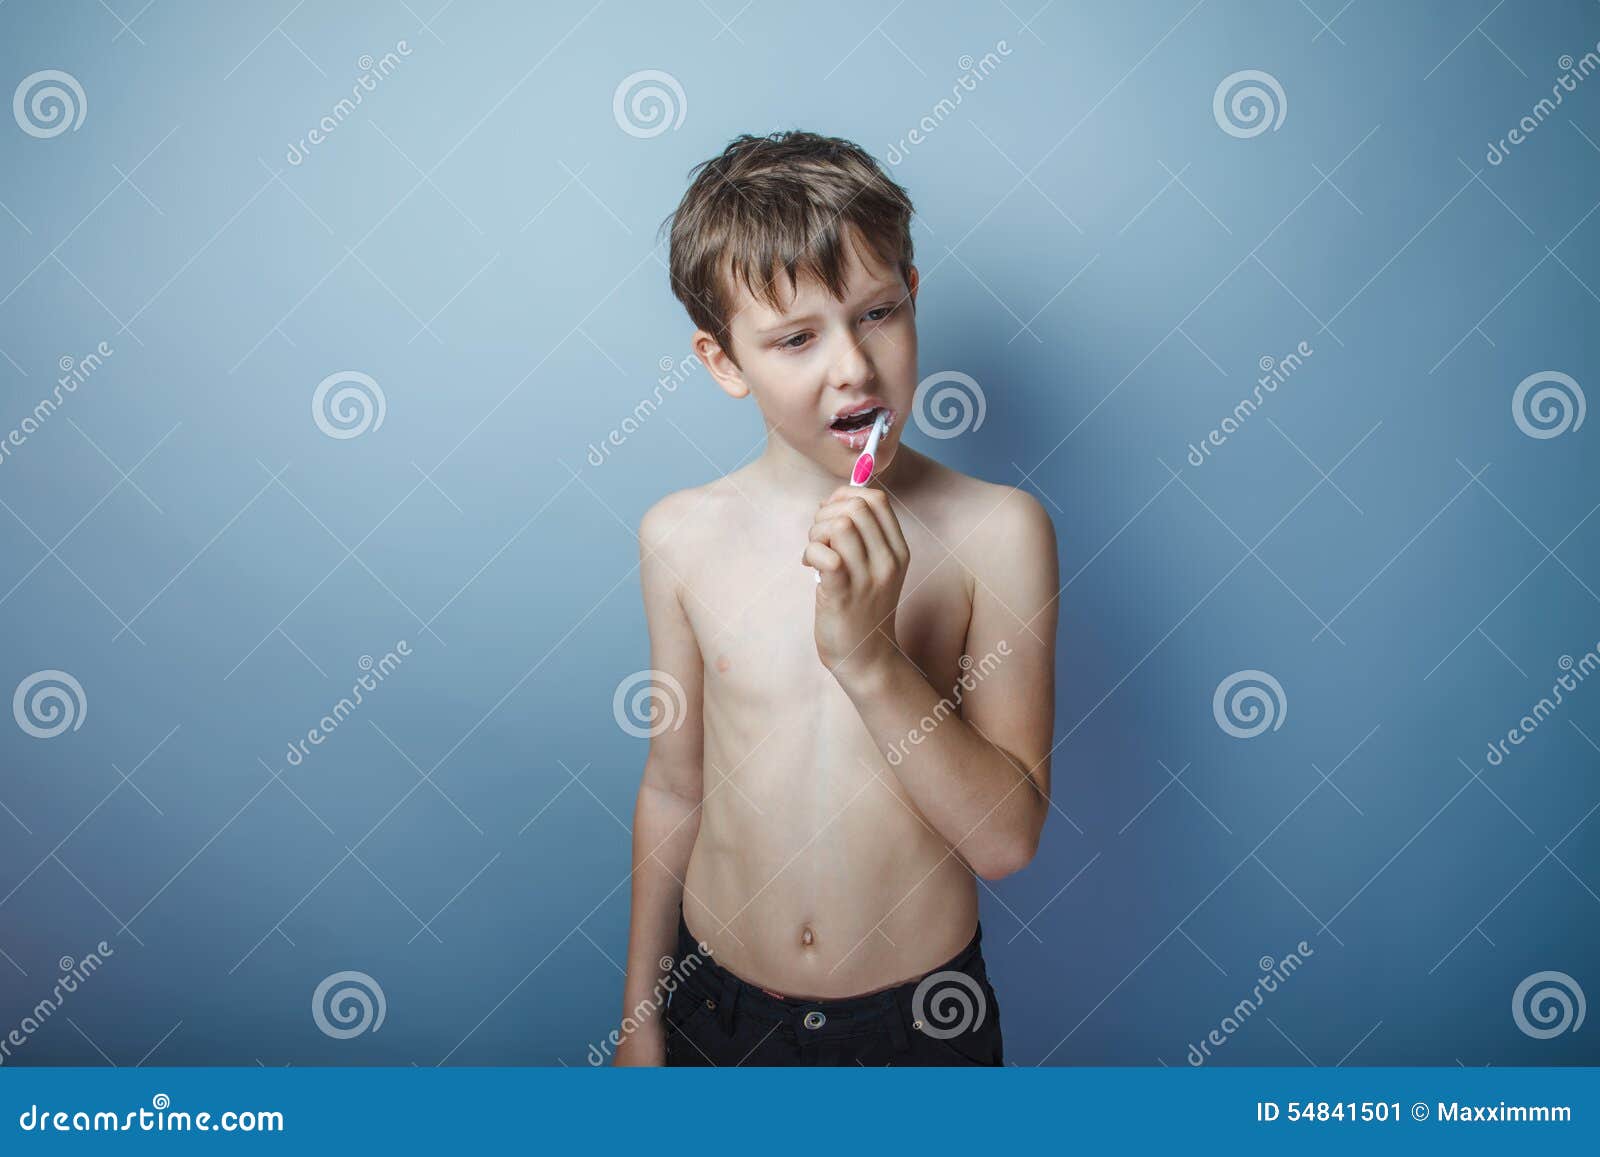 Teenager Boy Of 10 Years European Appearance Is Stock 